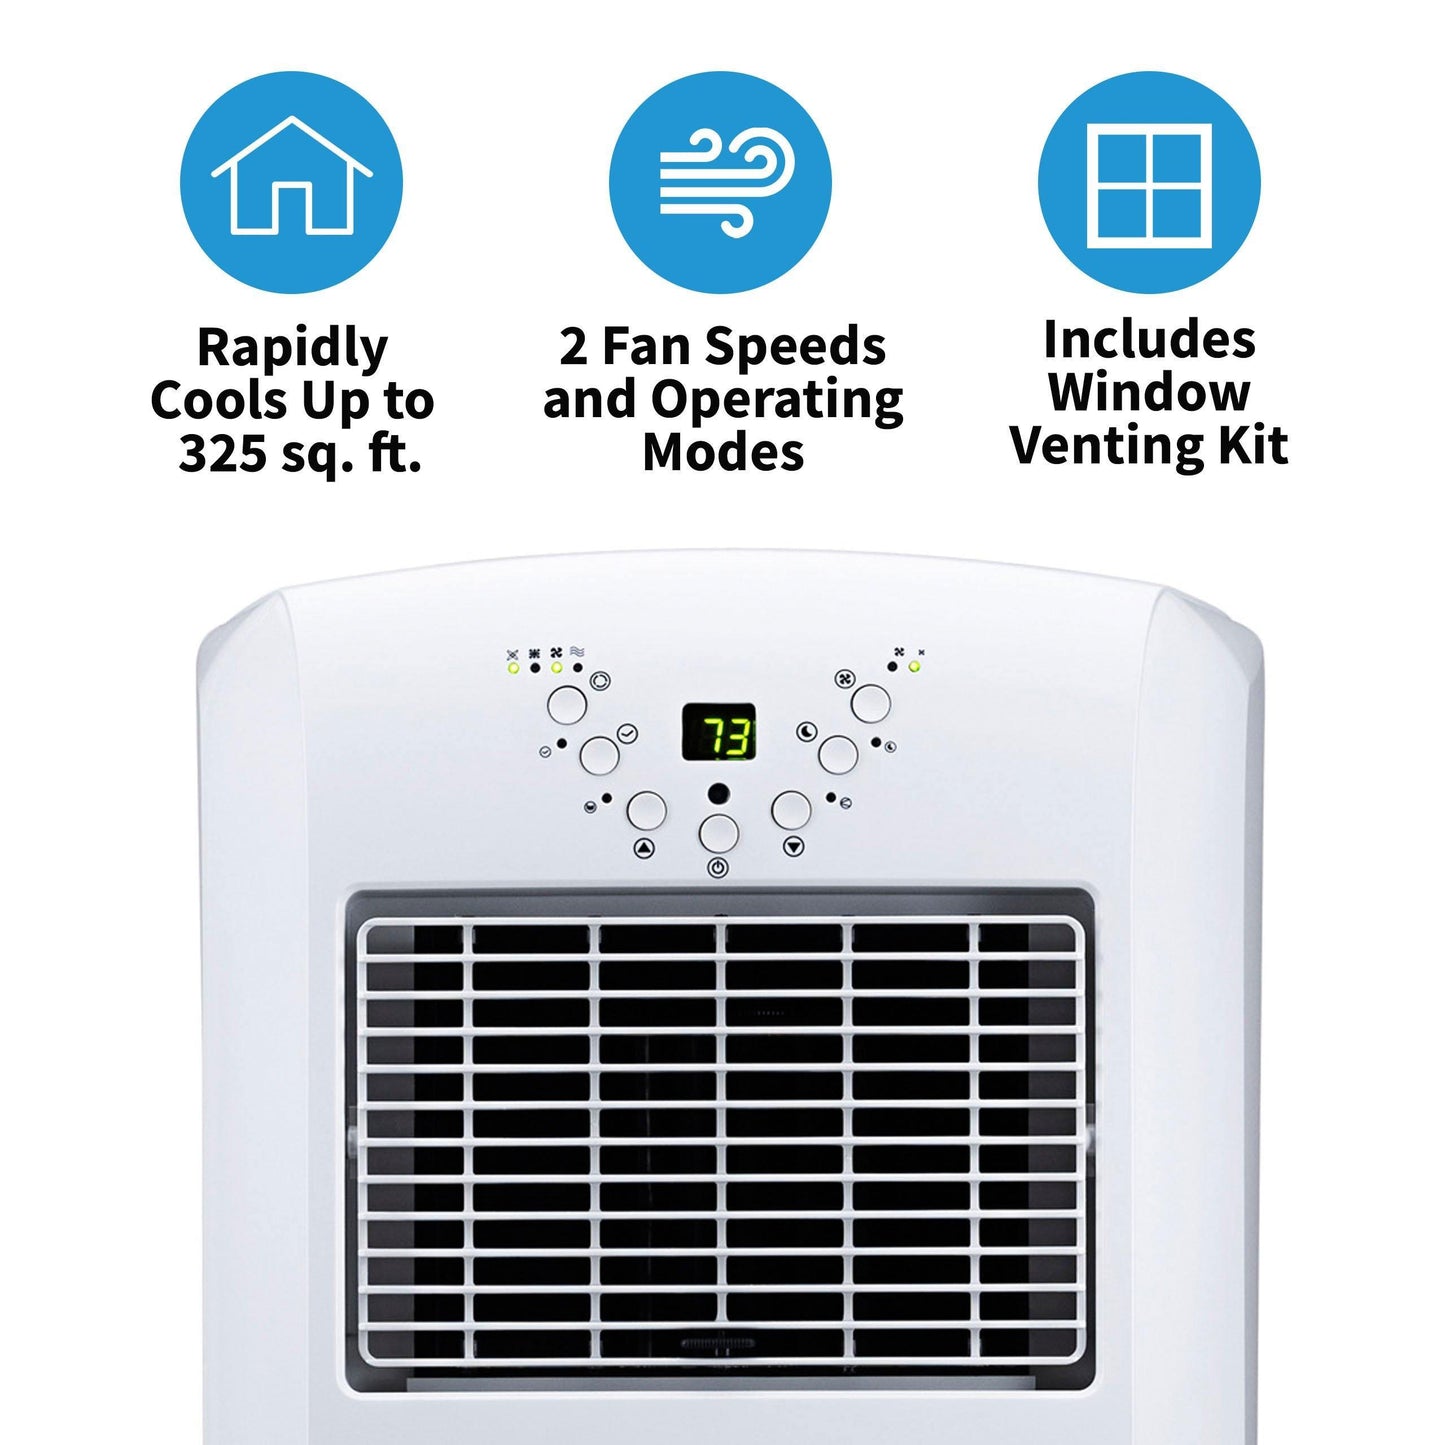 Newair Portable Air Conditioner, 10,000 BTUs, Easy Setup Window Venting Kit and Remote Control SKU AC-10100E - Elite Air Purifiers/Creating Legacy Investments LLC